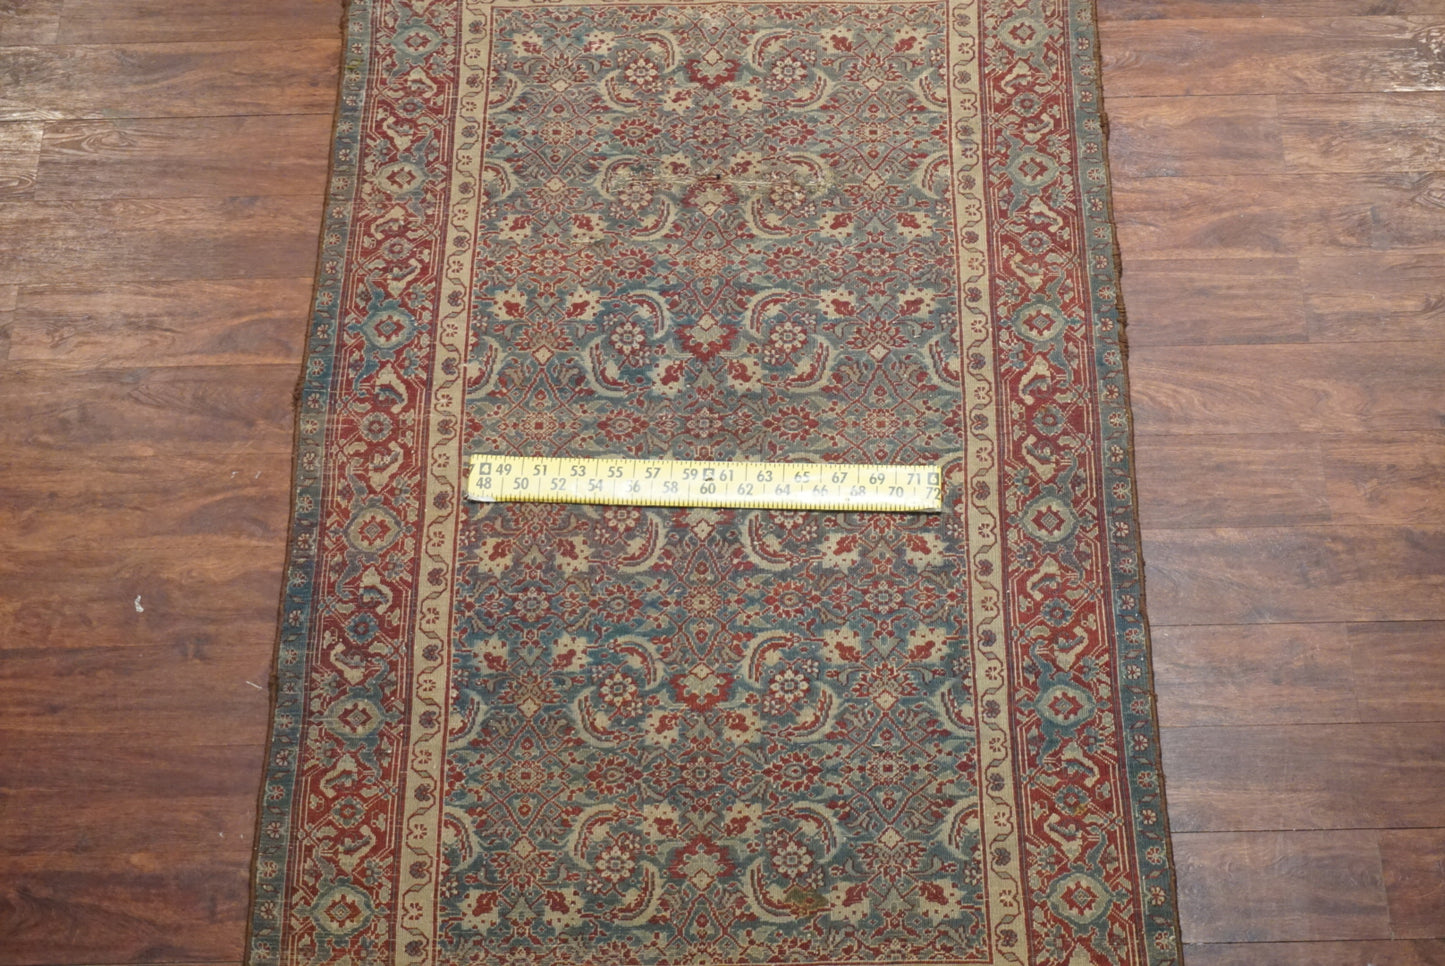 4X7 Antique Green Indian Agra Rug, ca 1900